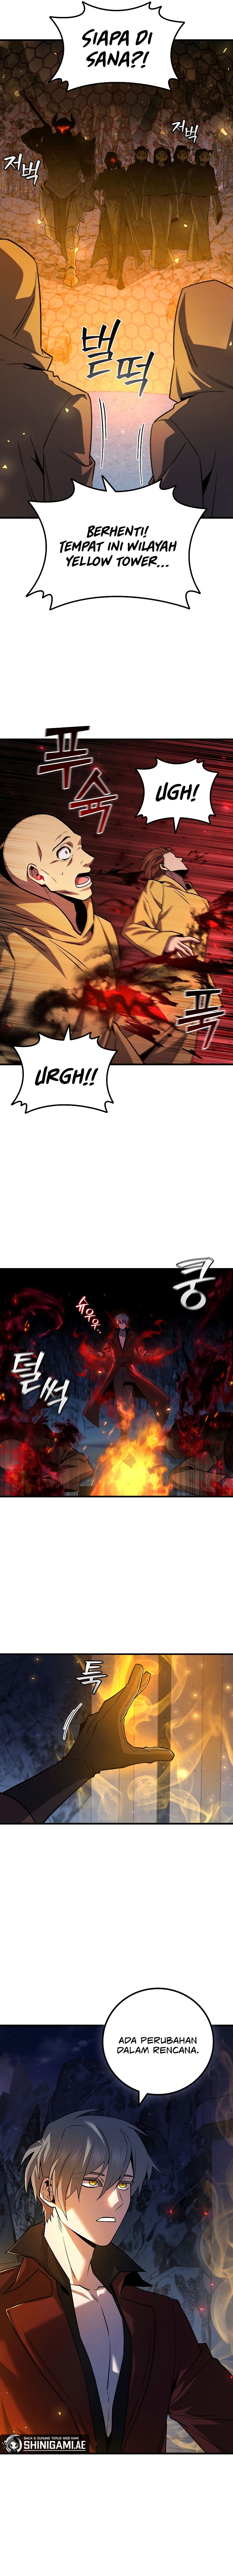 dragon-devouring-mage Chapter 43